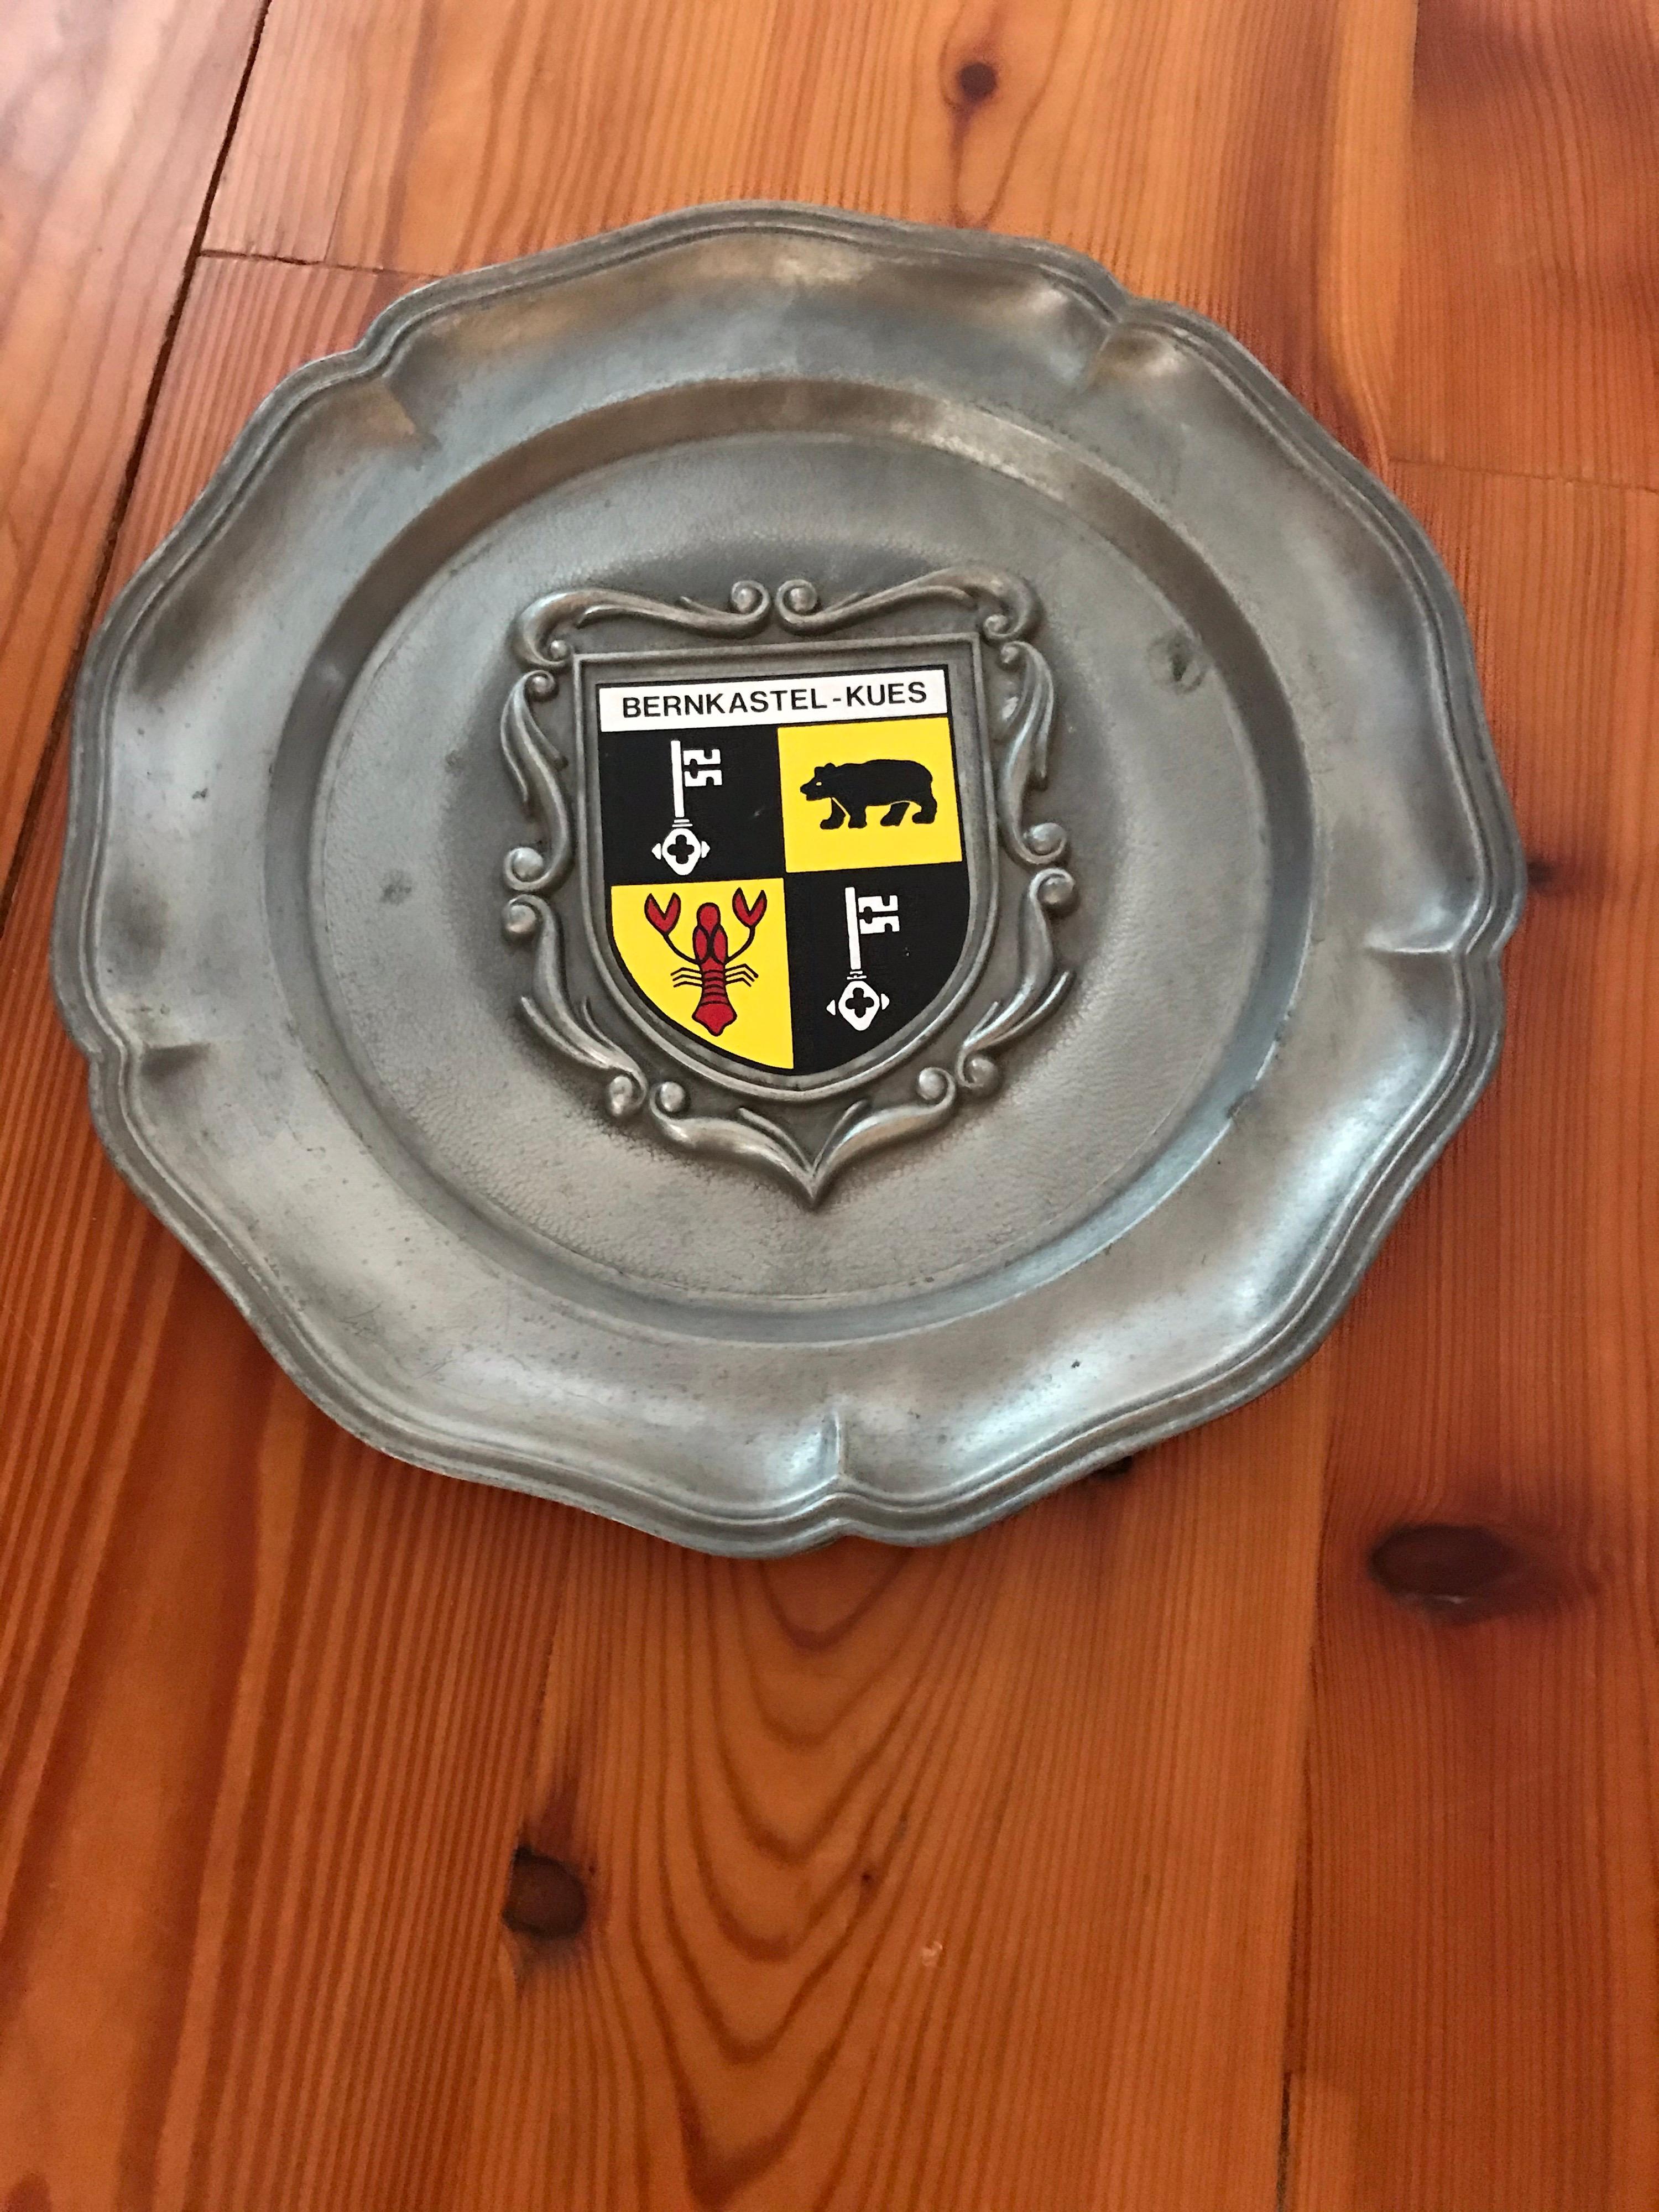 Vintage large pewter with crest plate, 1970s
Wall plate made of tin, wall decoration, wall decoration.